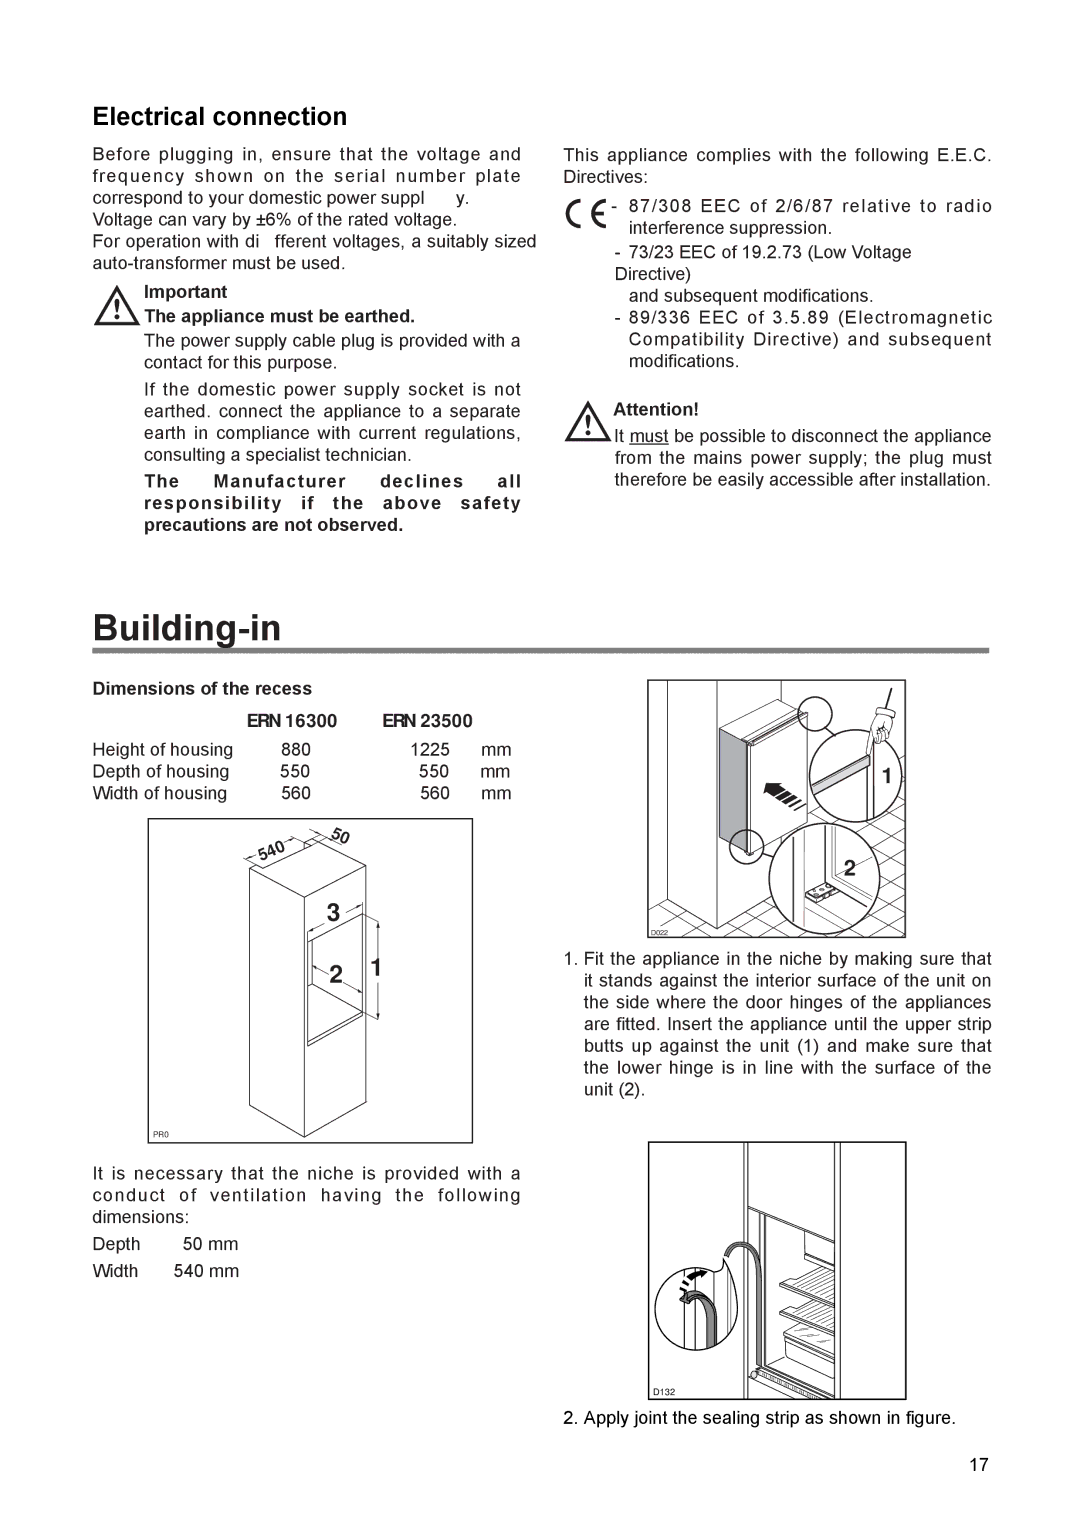 Electrolux ERN 23500 manual Building-in, Electrical connection, Appliance must be earthed, Dimensions of the recess ERN 